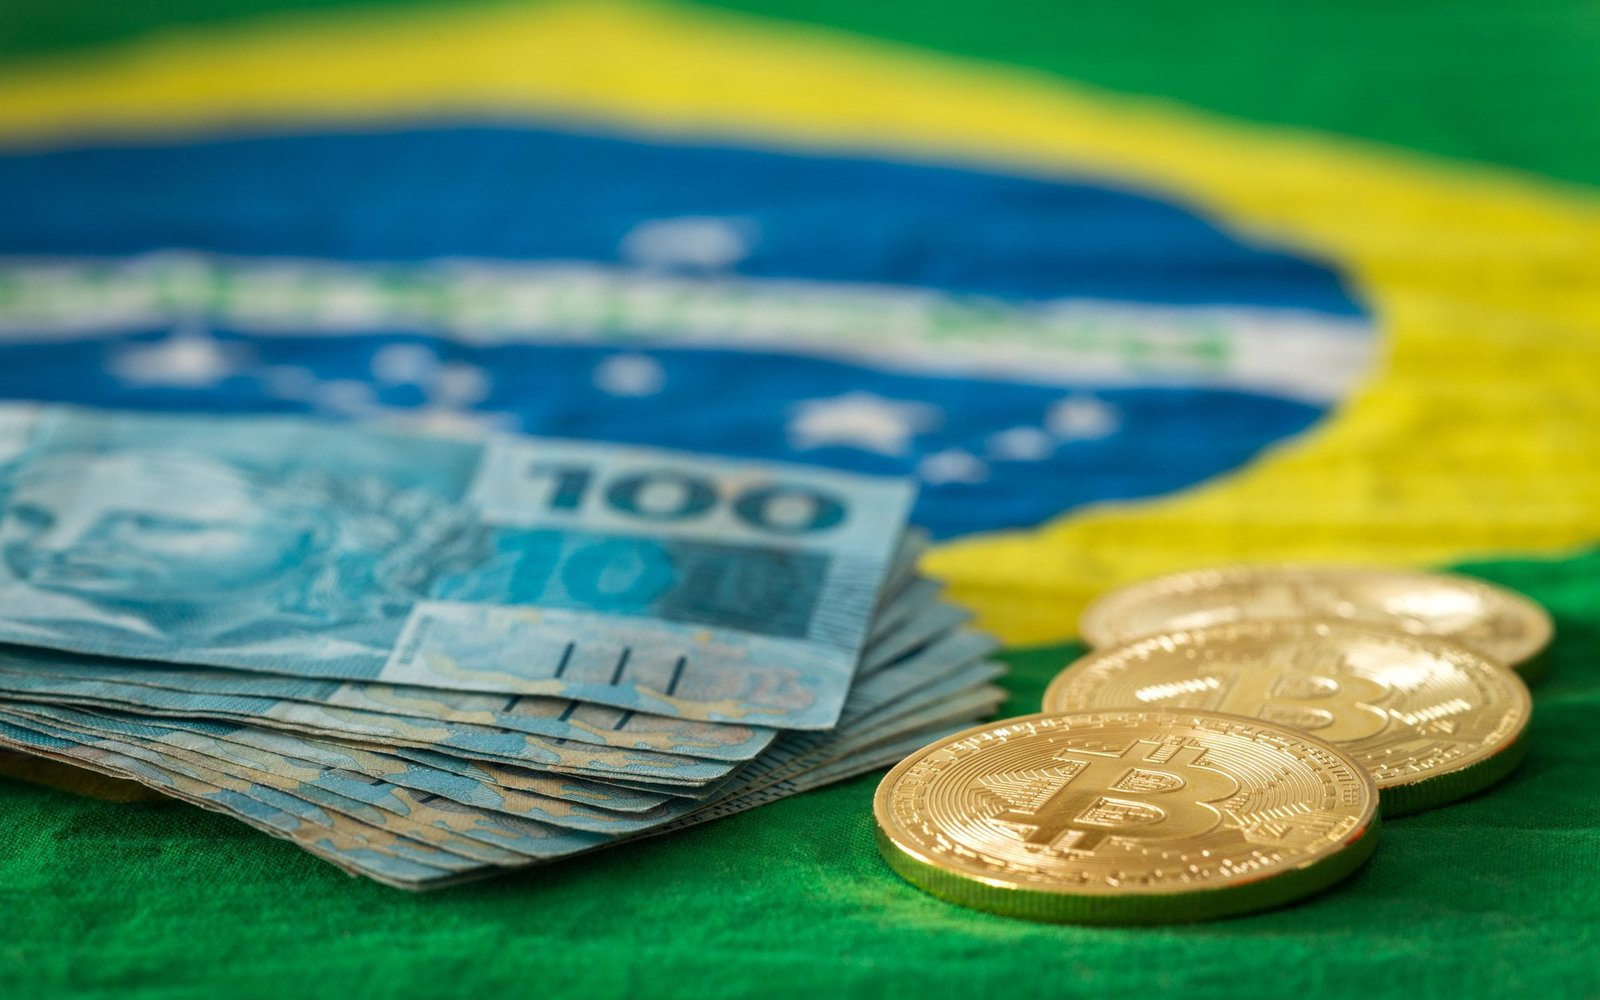 Brazil sees the backend tech of Bitcoin as a better payment system